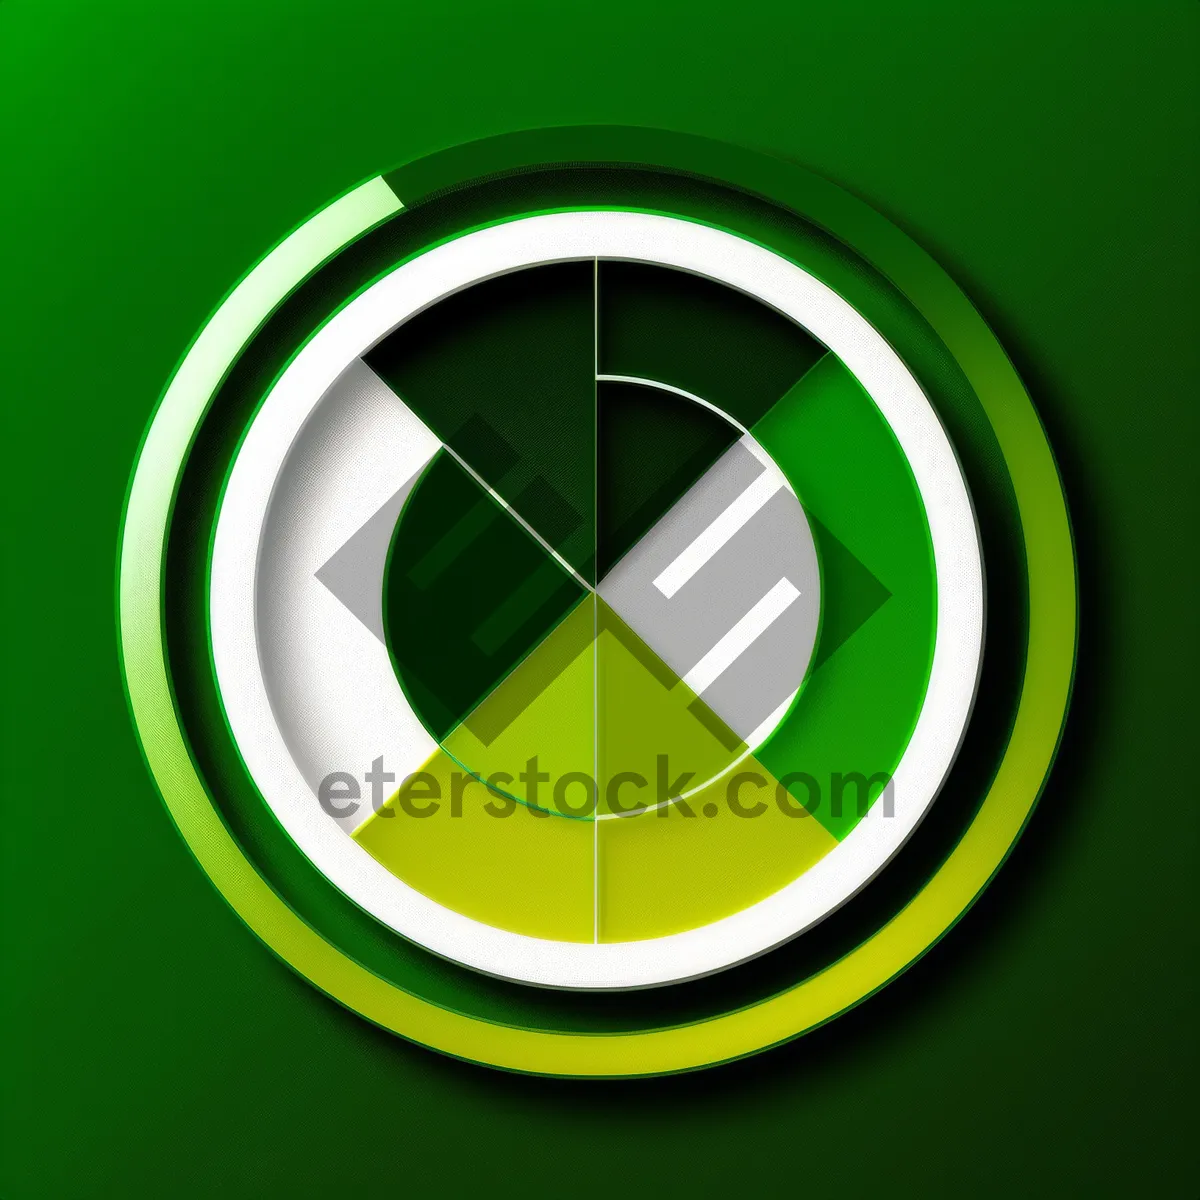 Picture of Web Button Icon Set: Shiny, Round, Glossy Circle Buttons